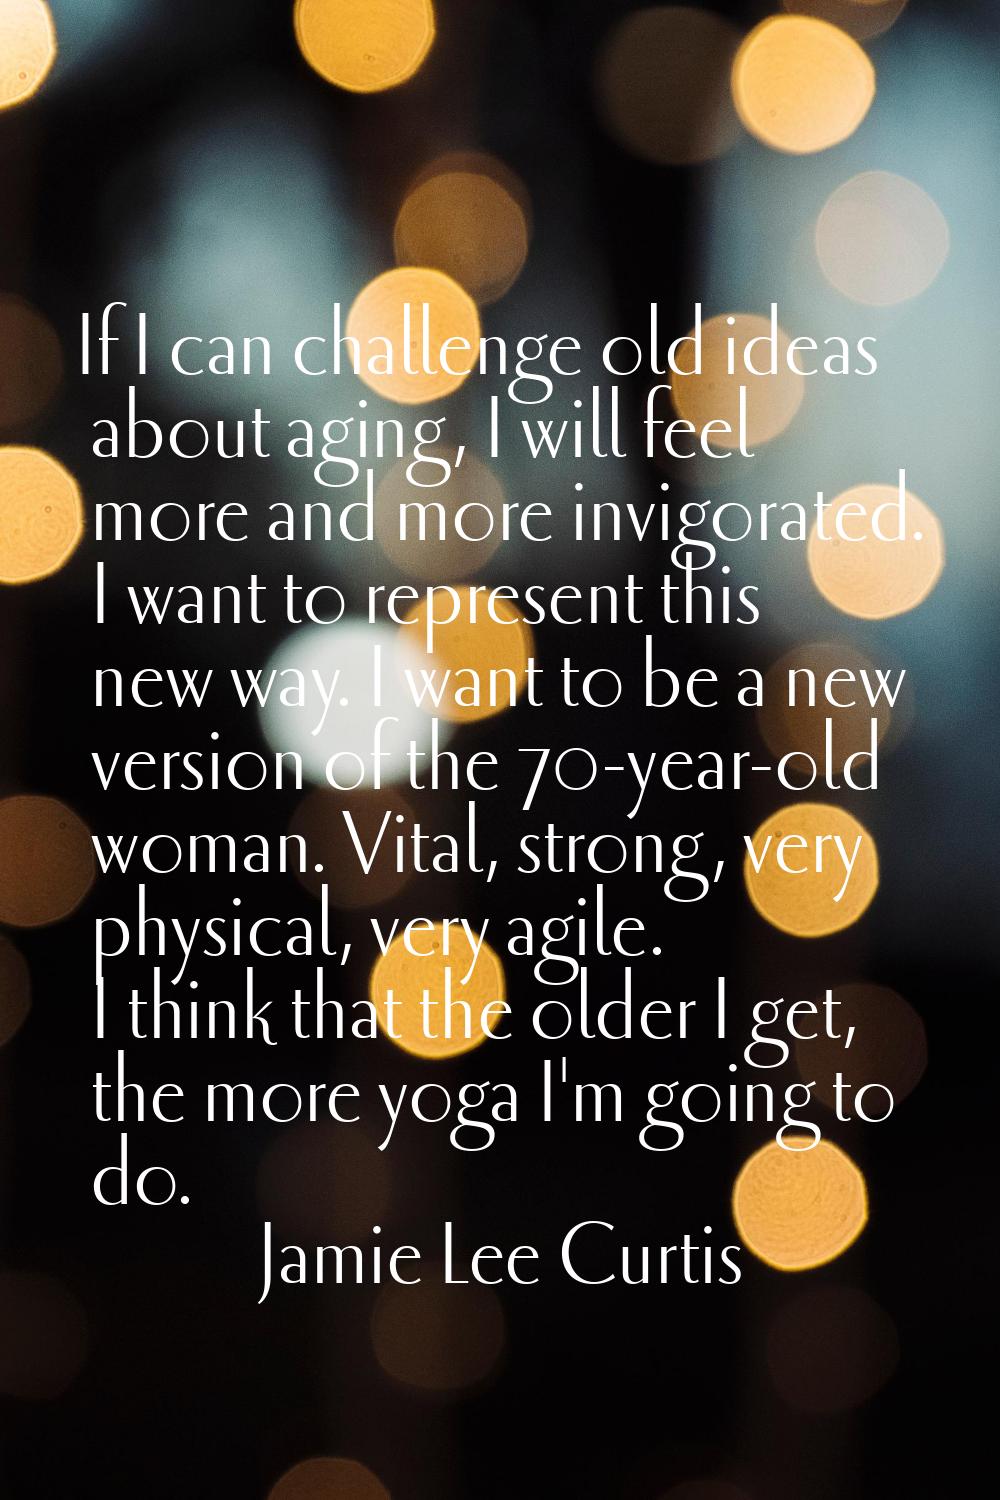 If I can challenge old ideas about aging, I will feel more and more invigorated. I want to represen